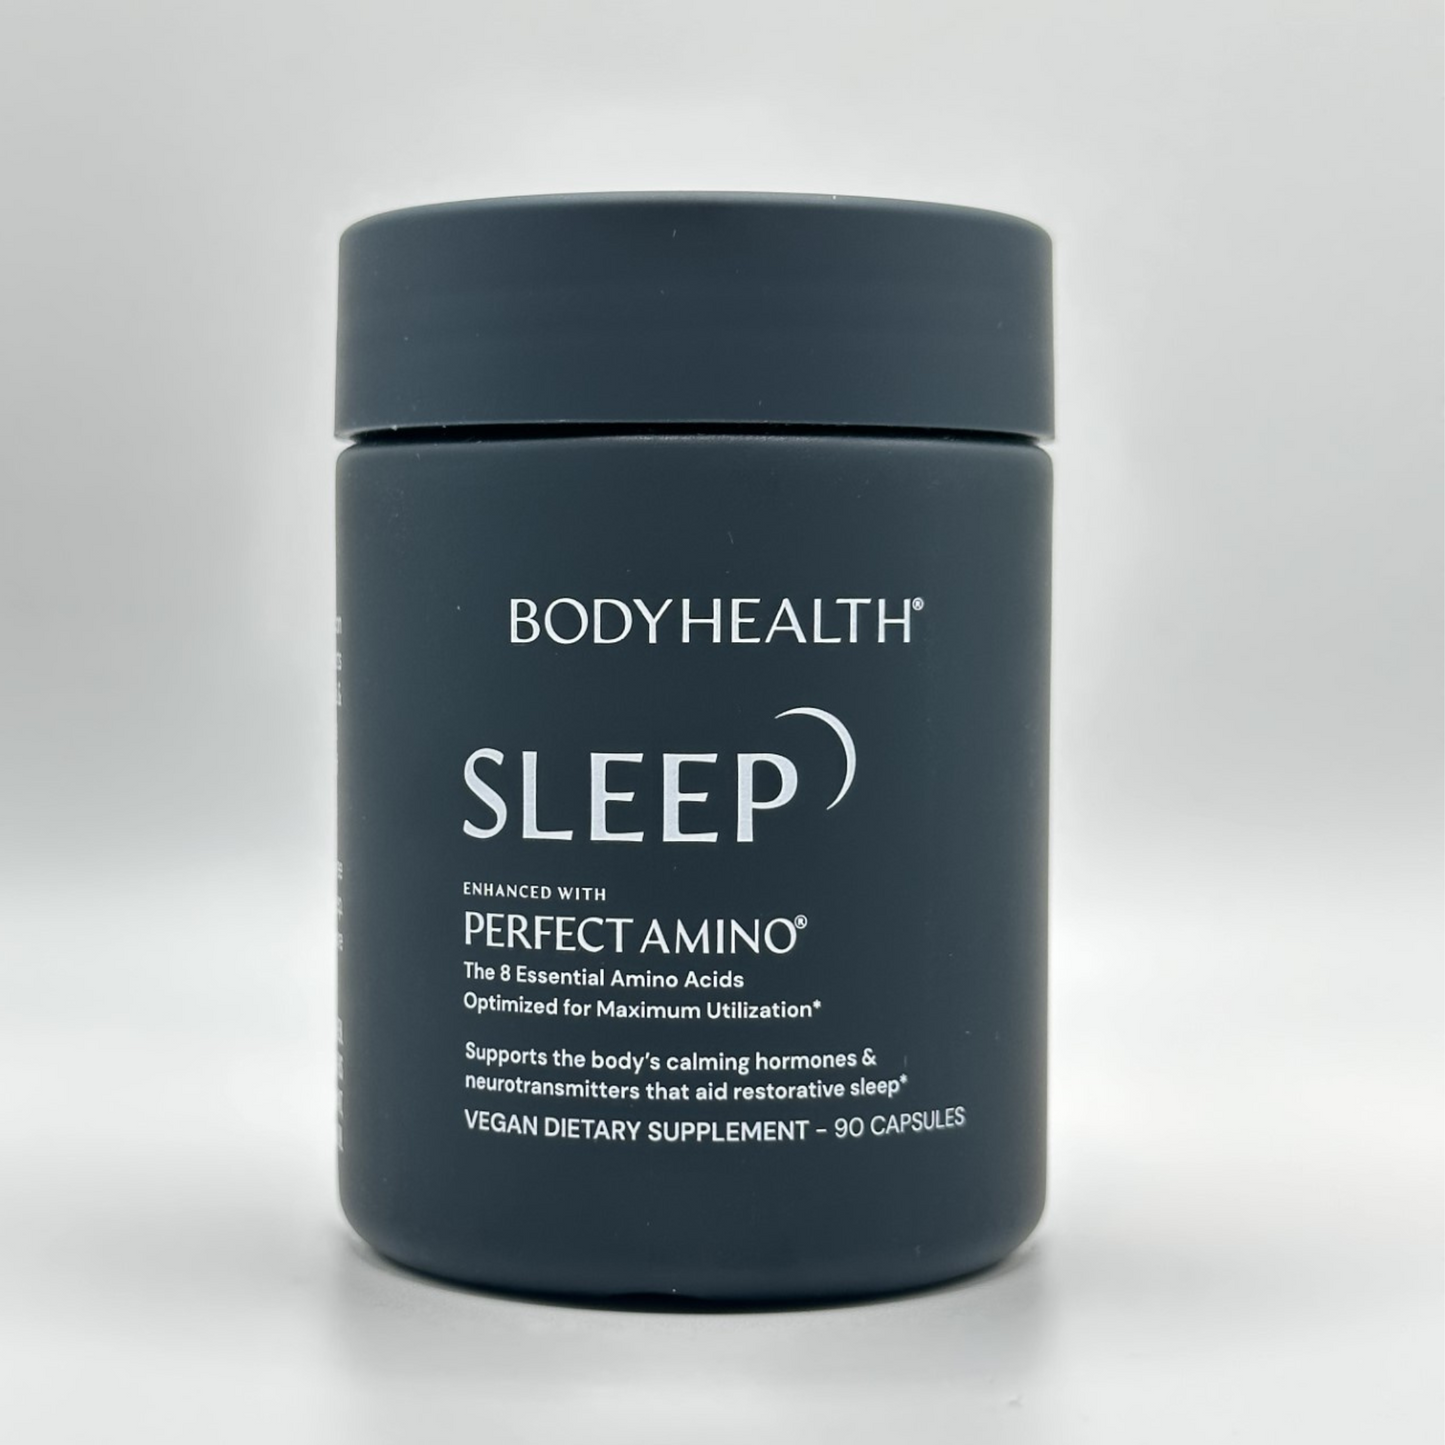 (Healthy Sleep Ultra) with Perfect Aminos 90ct